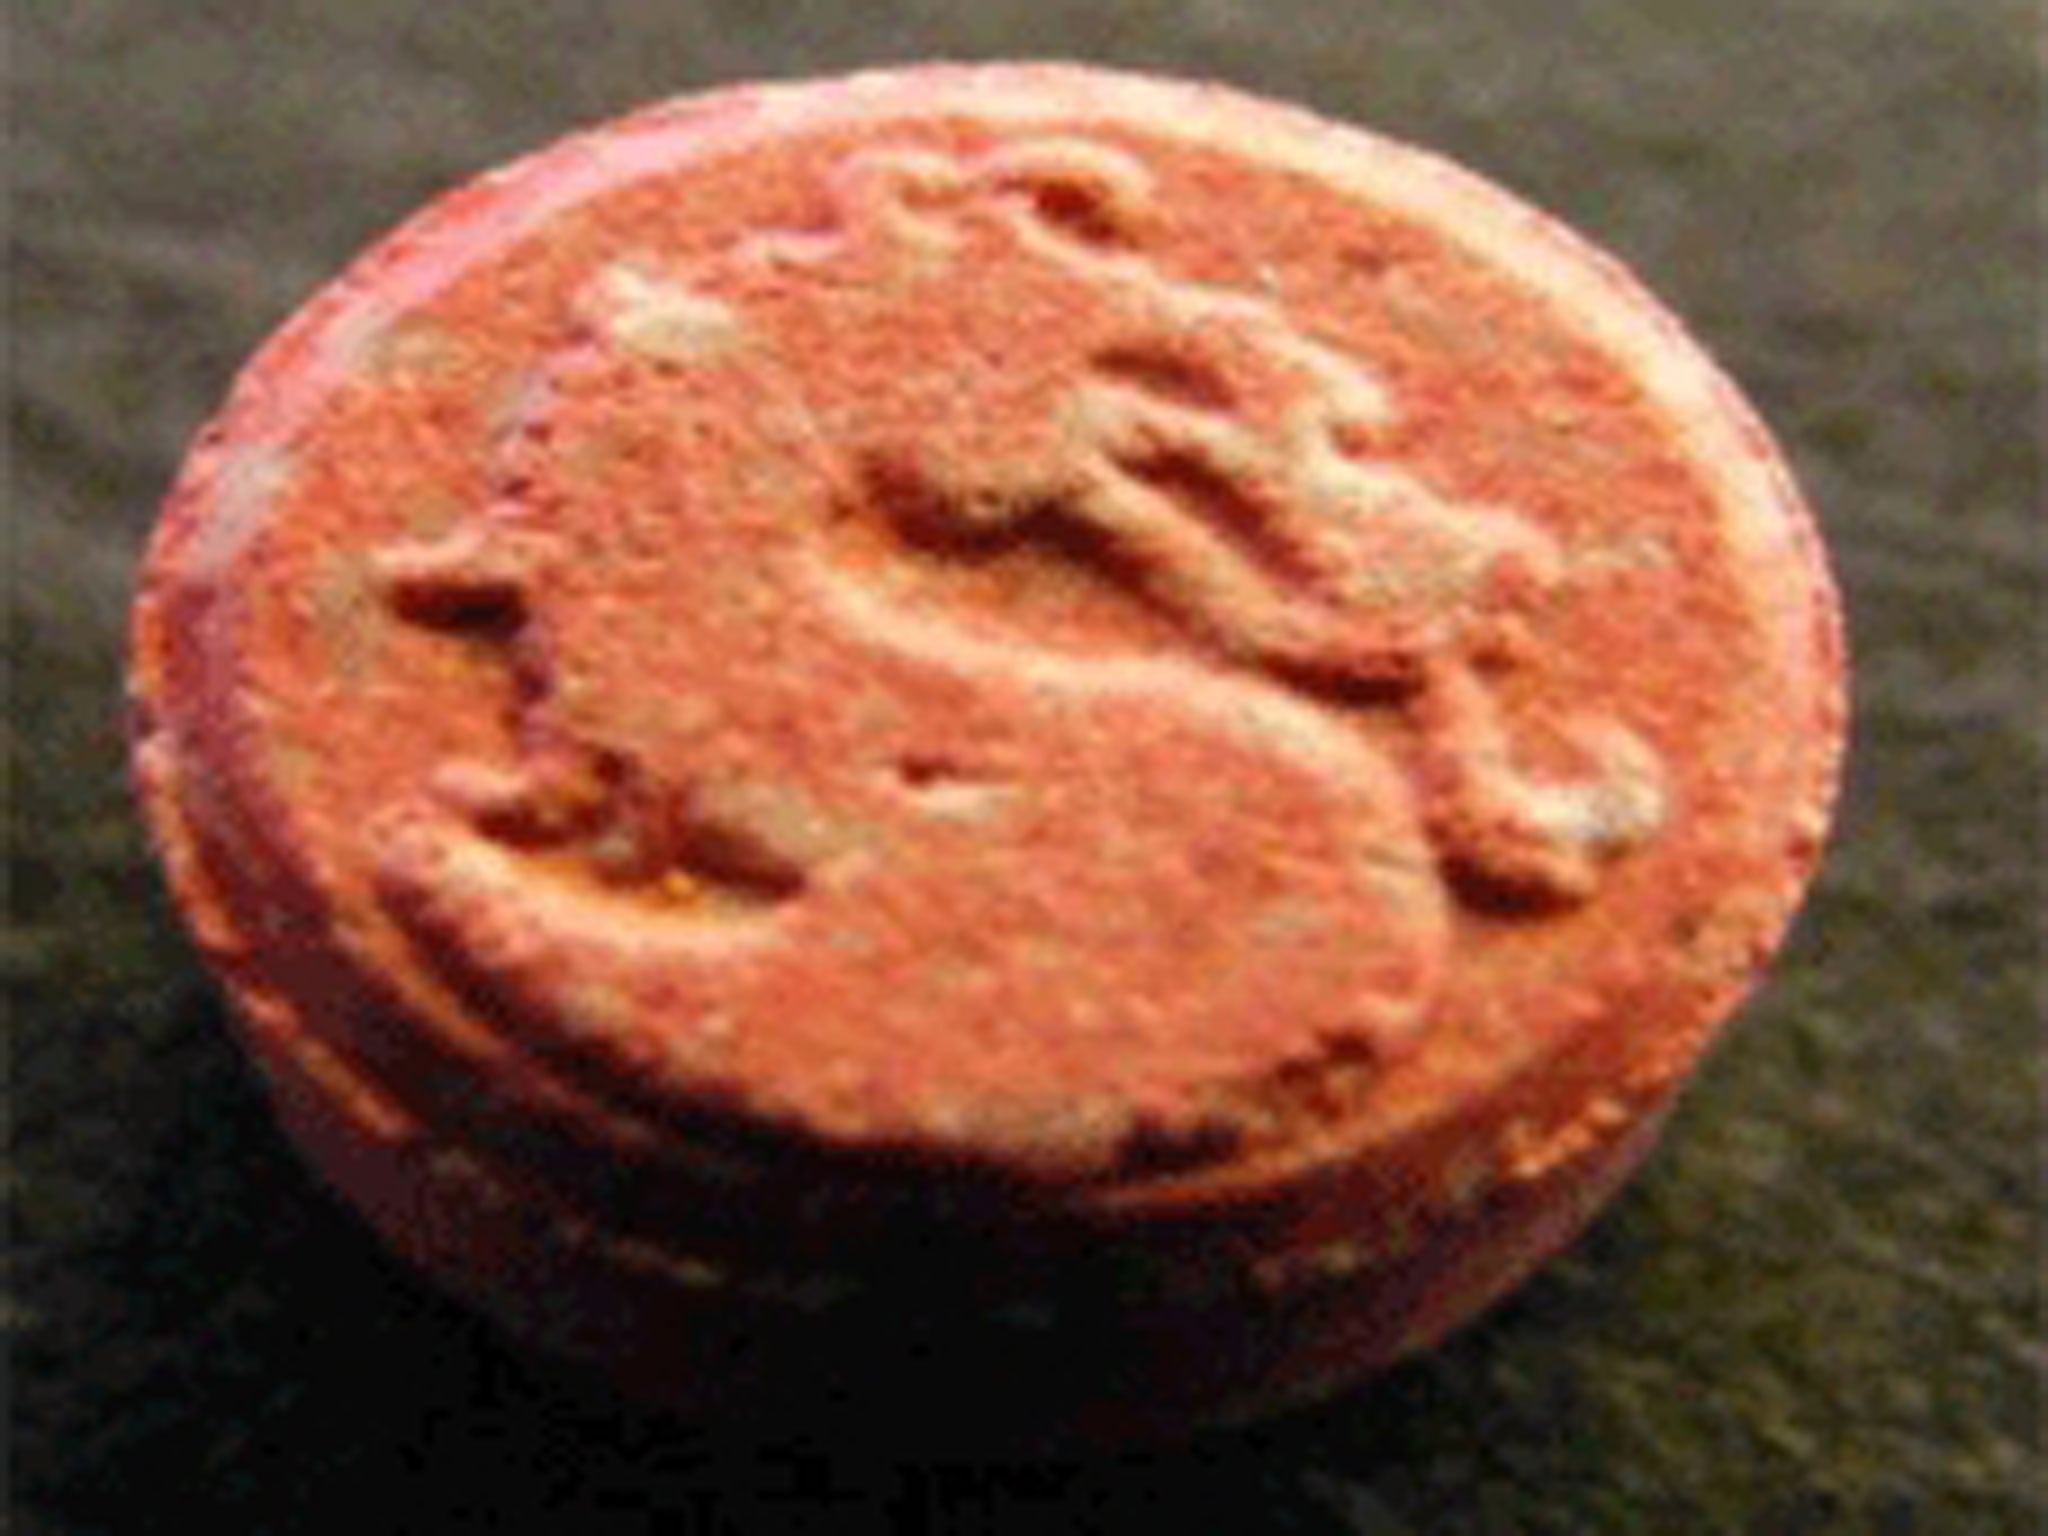 Mortal Kombat pills are red with a dragon imprint